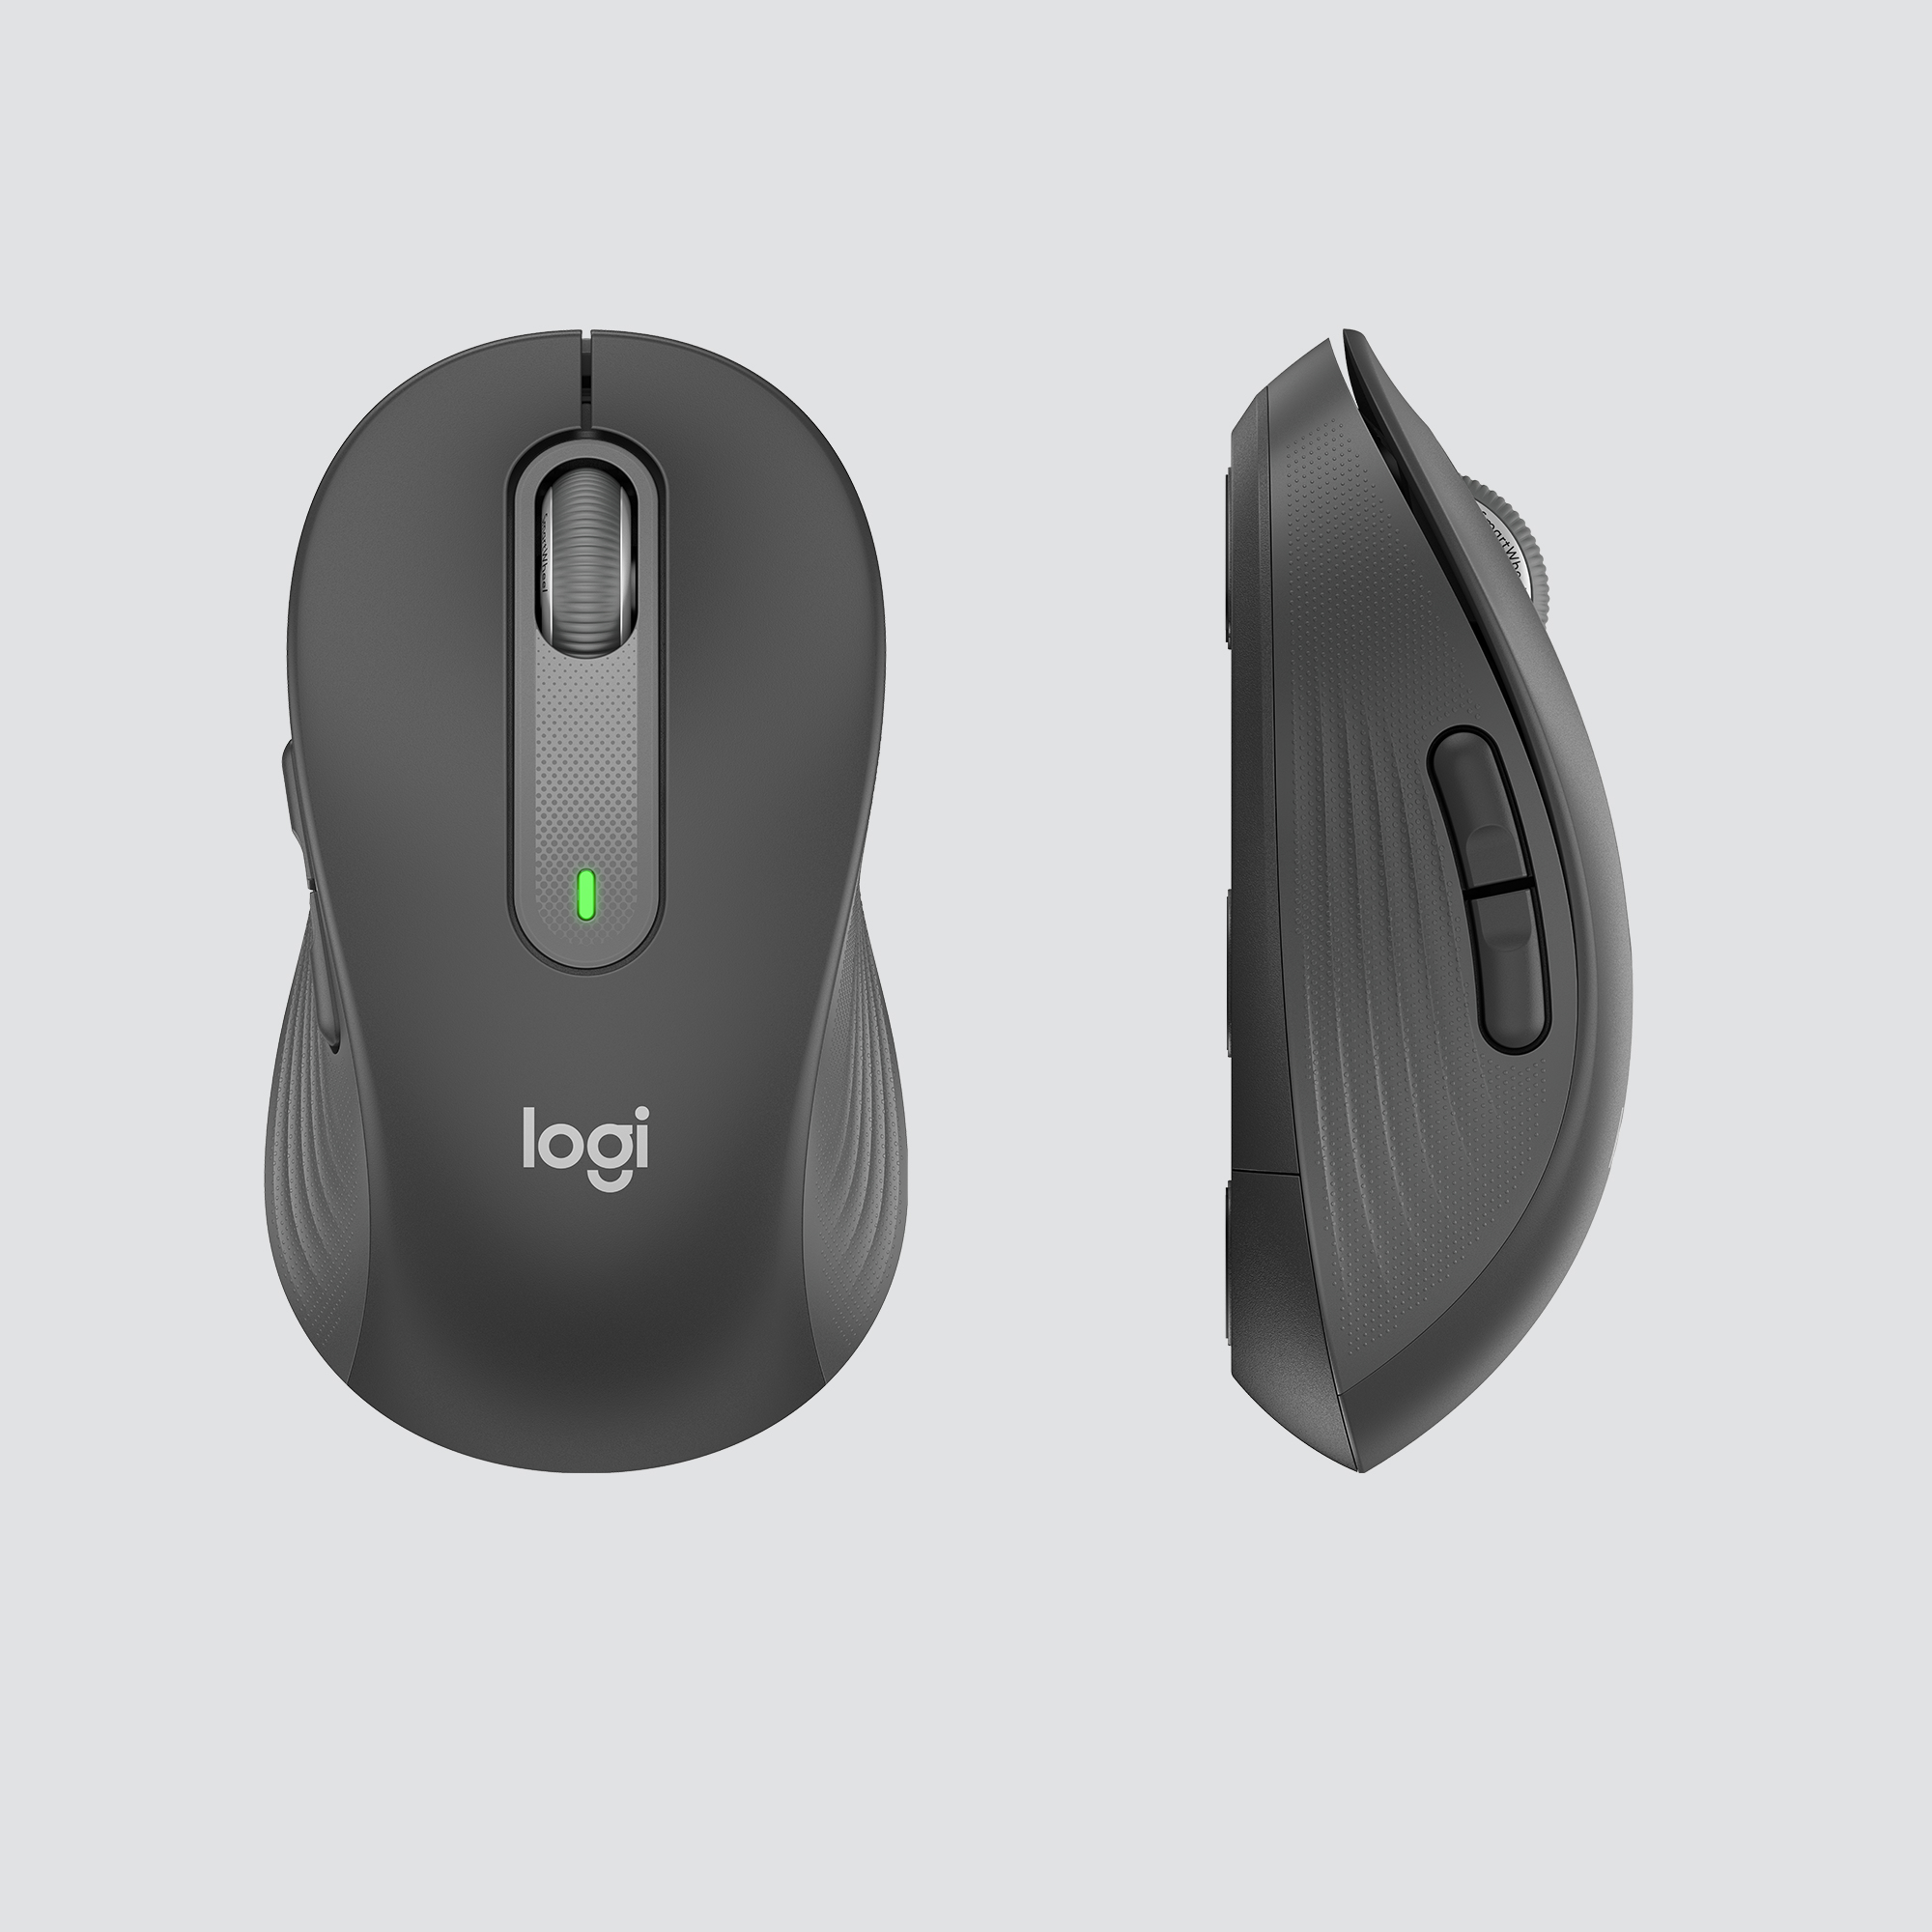 Logitech Signature MK650 Combo for Business, hands on: An affordable duo